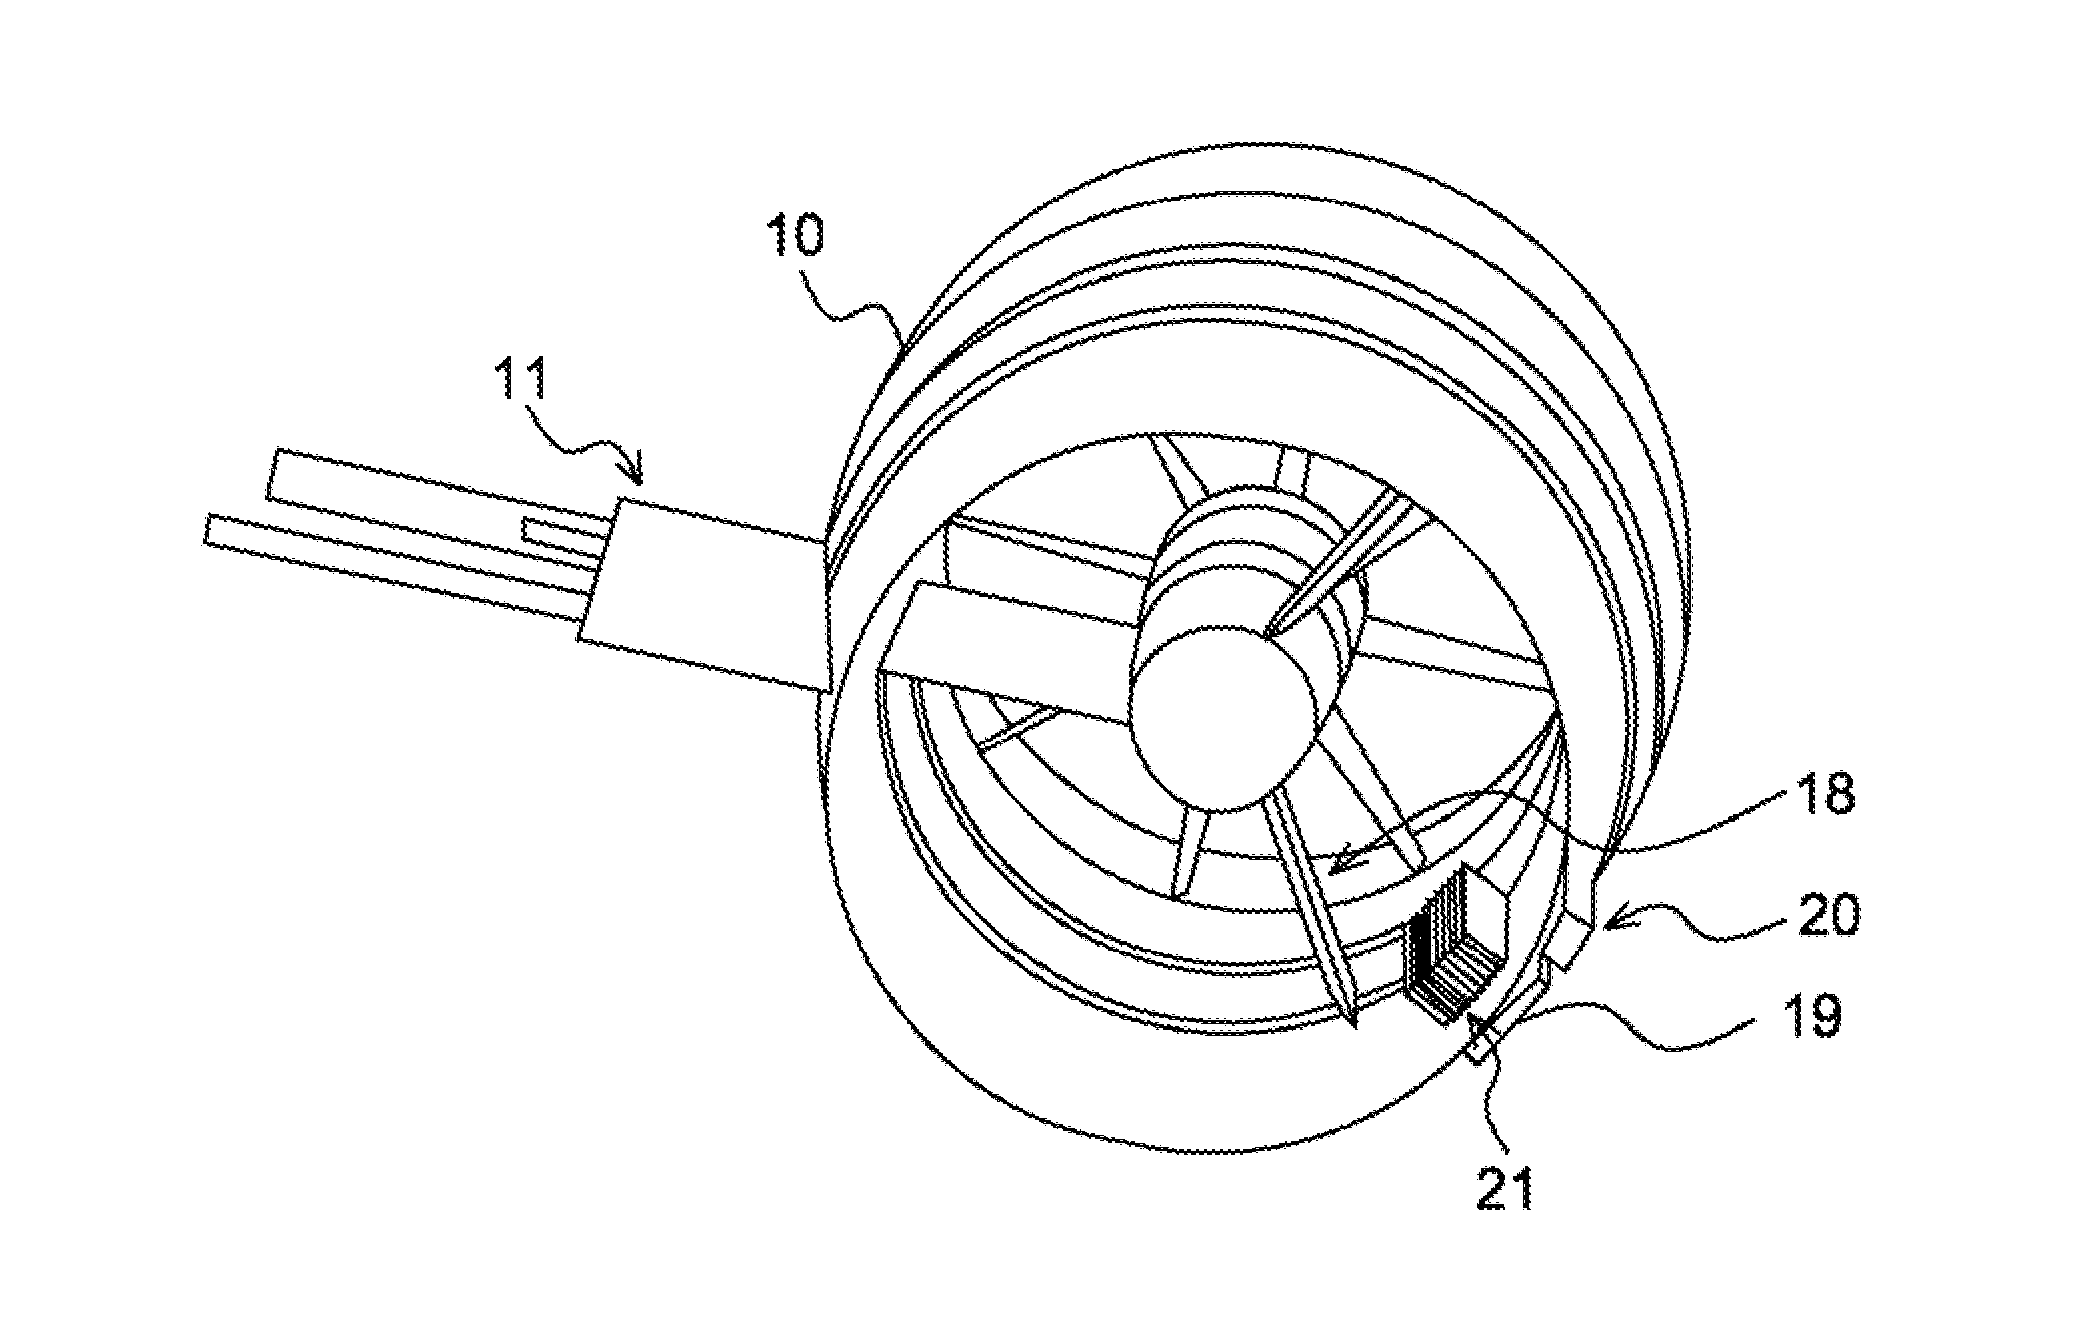 Electric propulsion assembly for an aircraft